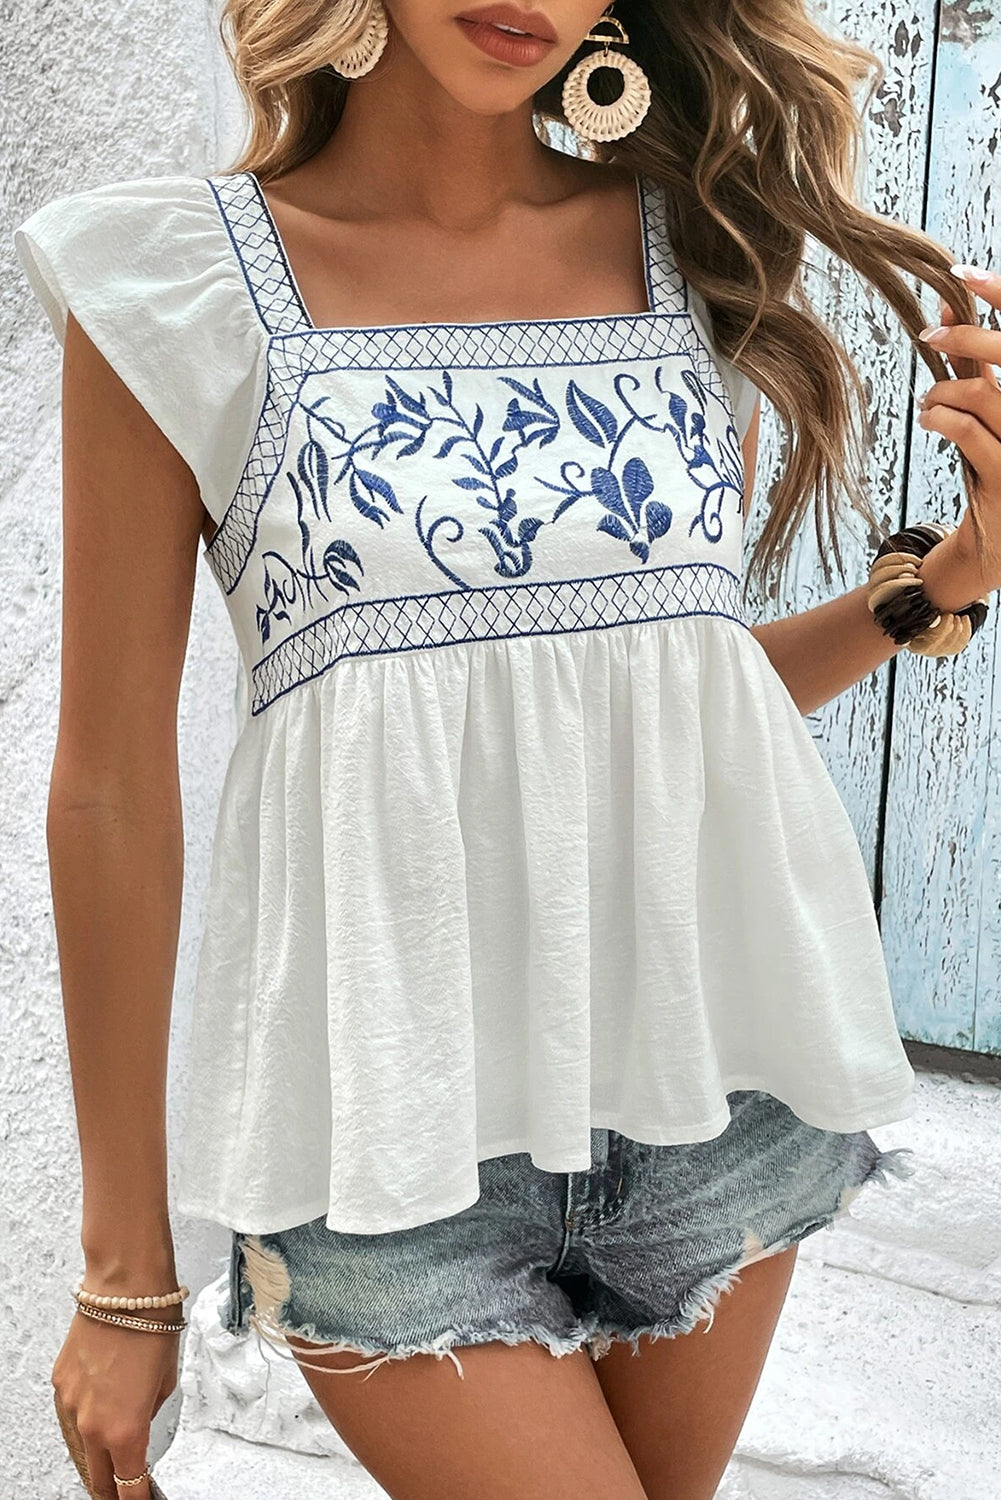 White Floral Embroidered Tie Back Ruffle Peplum Blouse